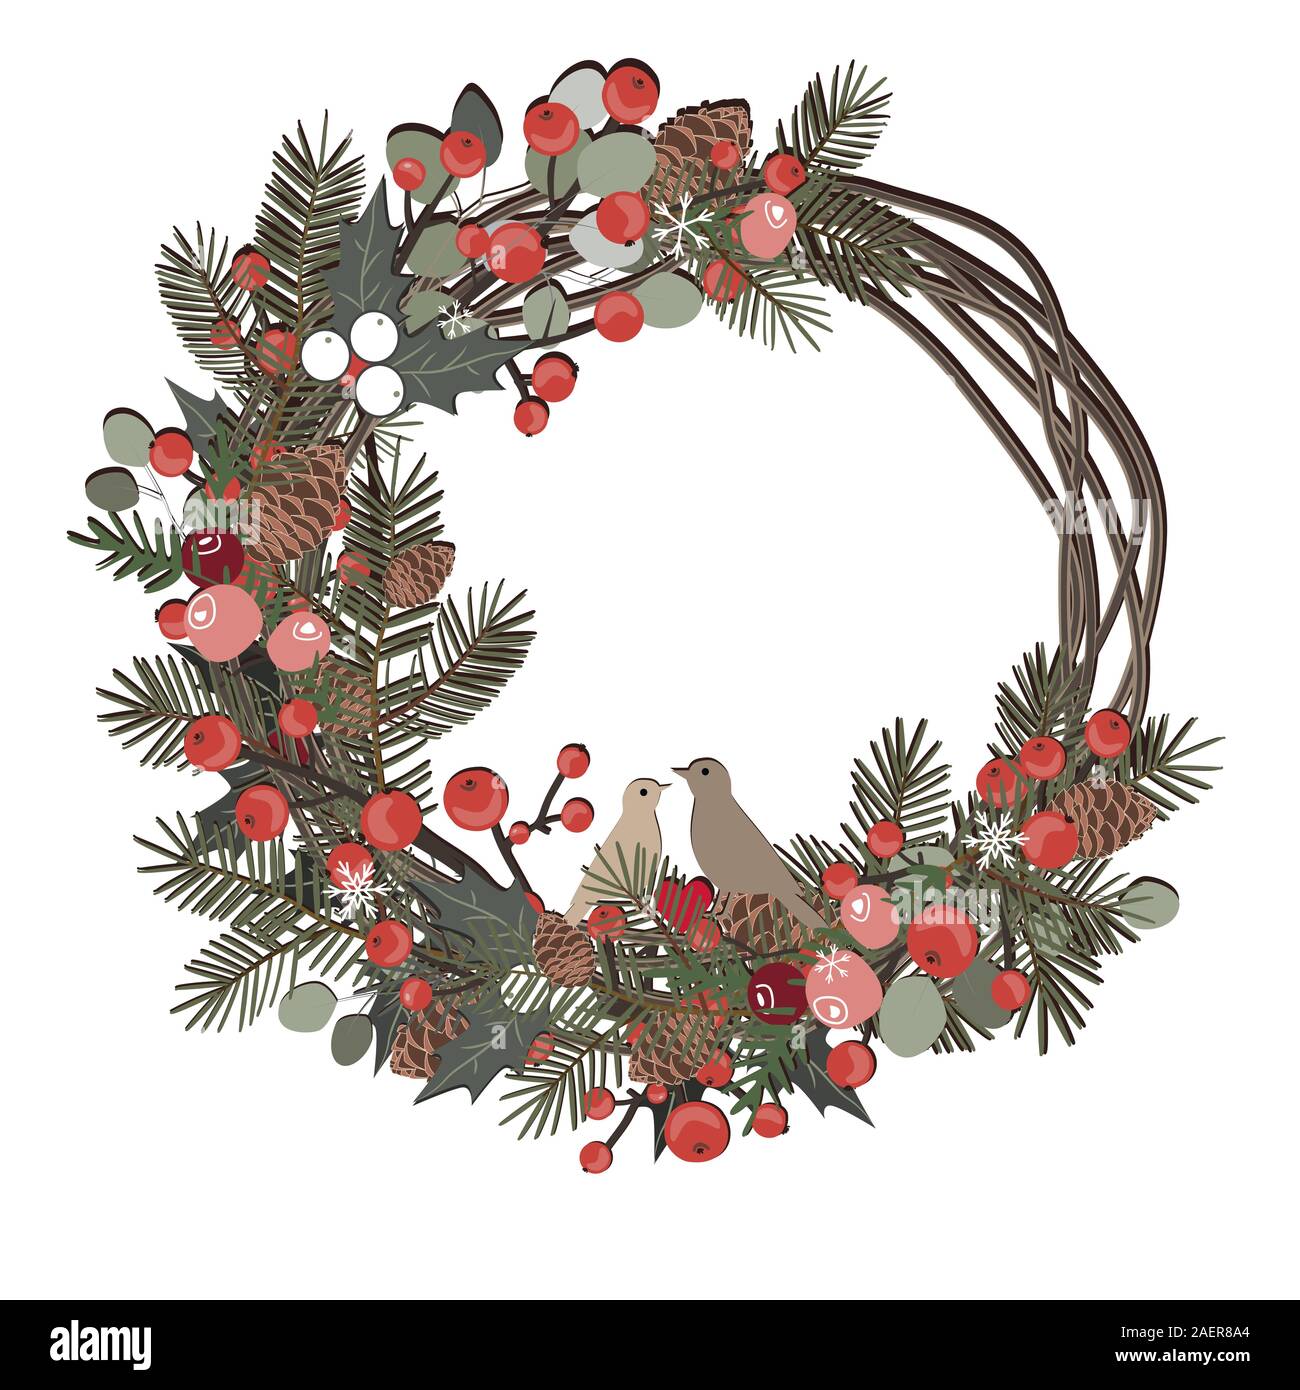 Beautiful Christmas decorative wreath of vine and pine branches, berries, ilex, cedar cones, and cute birds isolated on white background. Vector Stock Vector